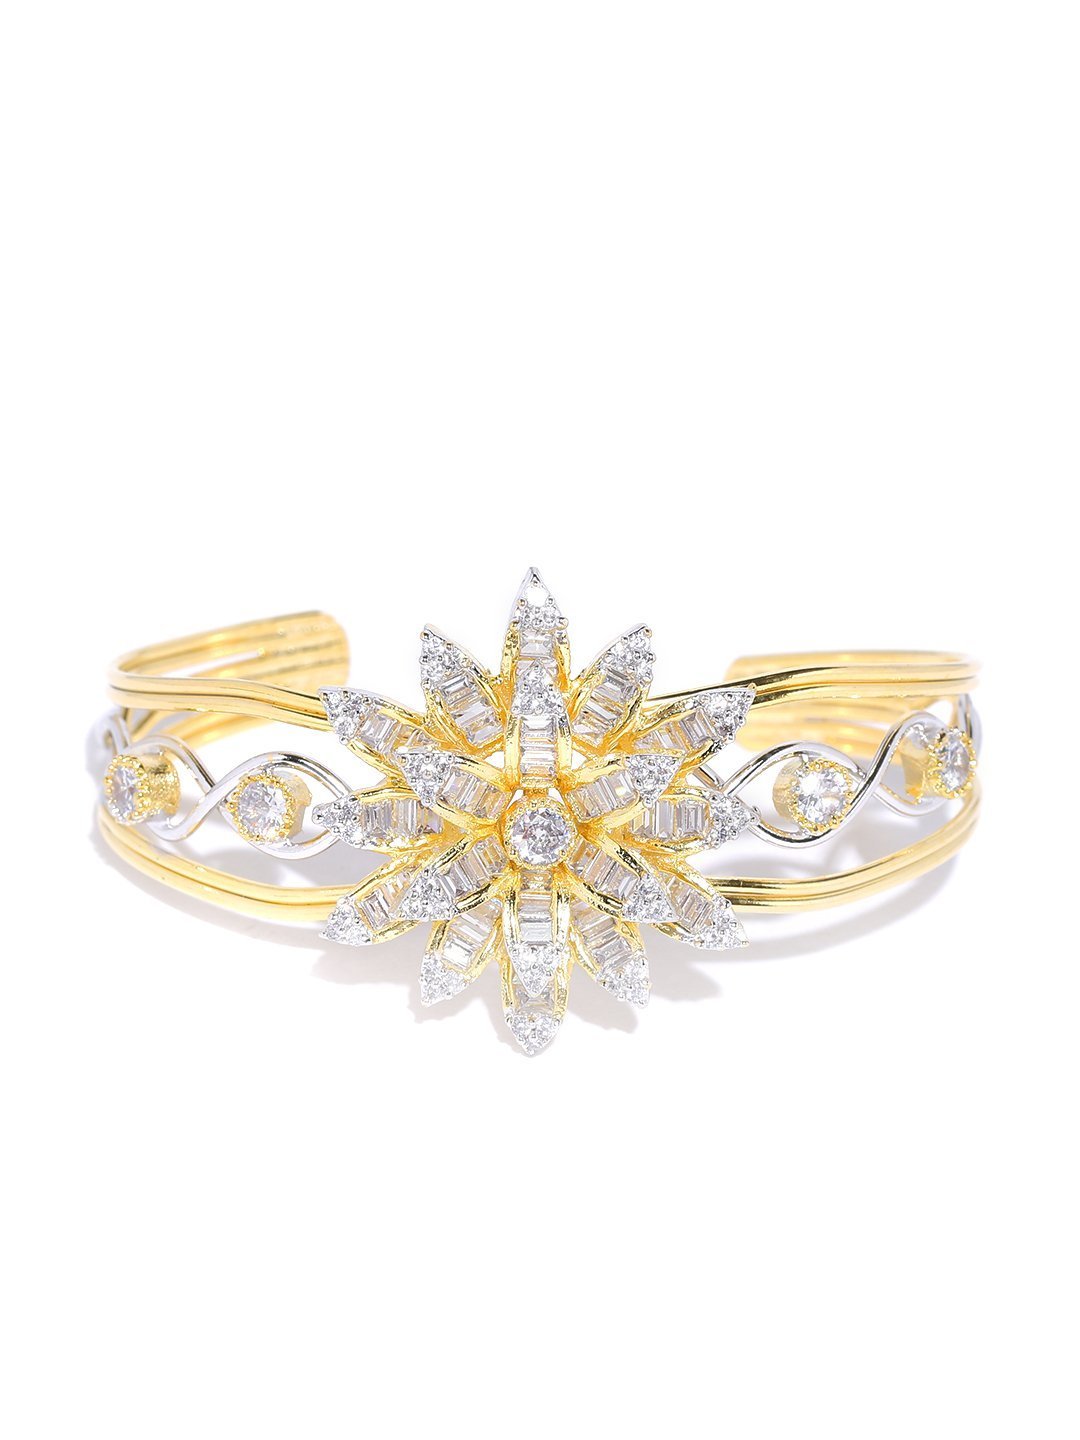 Women's Gold-Plated American Diamond Studded Cuff Bracelet in Floral Pattern - Priyaasi